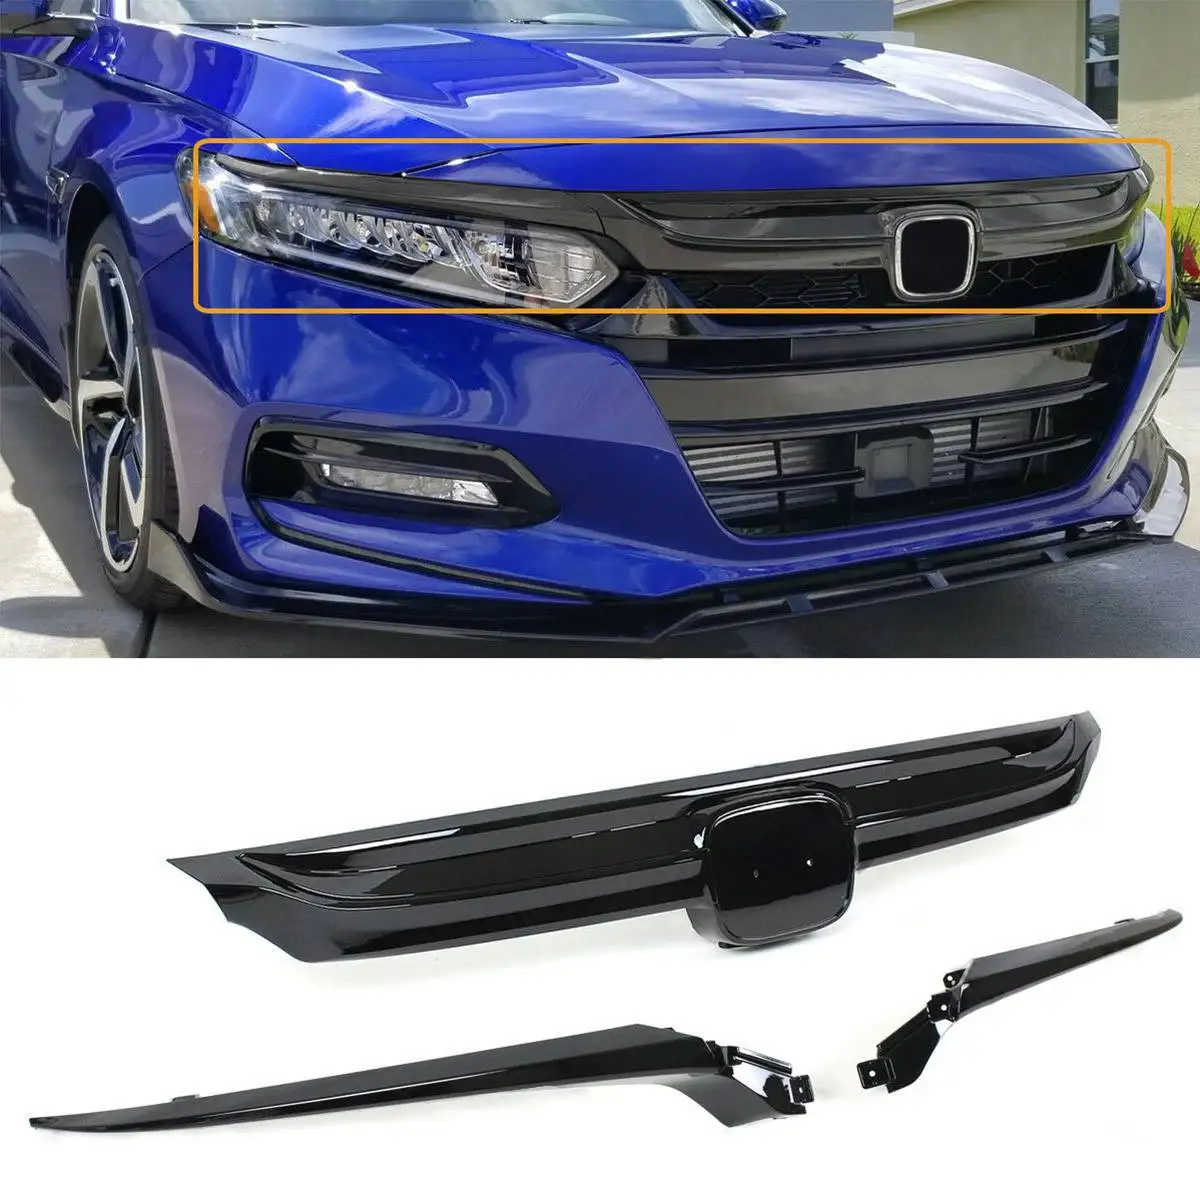 Glossy Black/Carbon Fiber Sport Style Front Grille Bumper Hood Grille Cover With Chrome Garnish For Honda For Accord 2018 2019